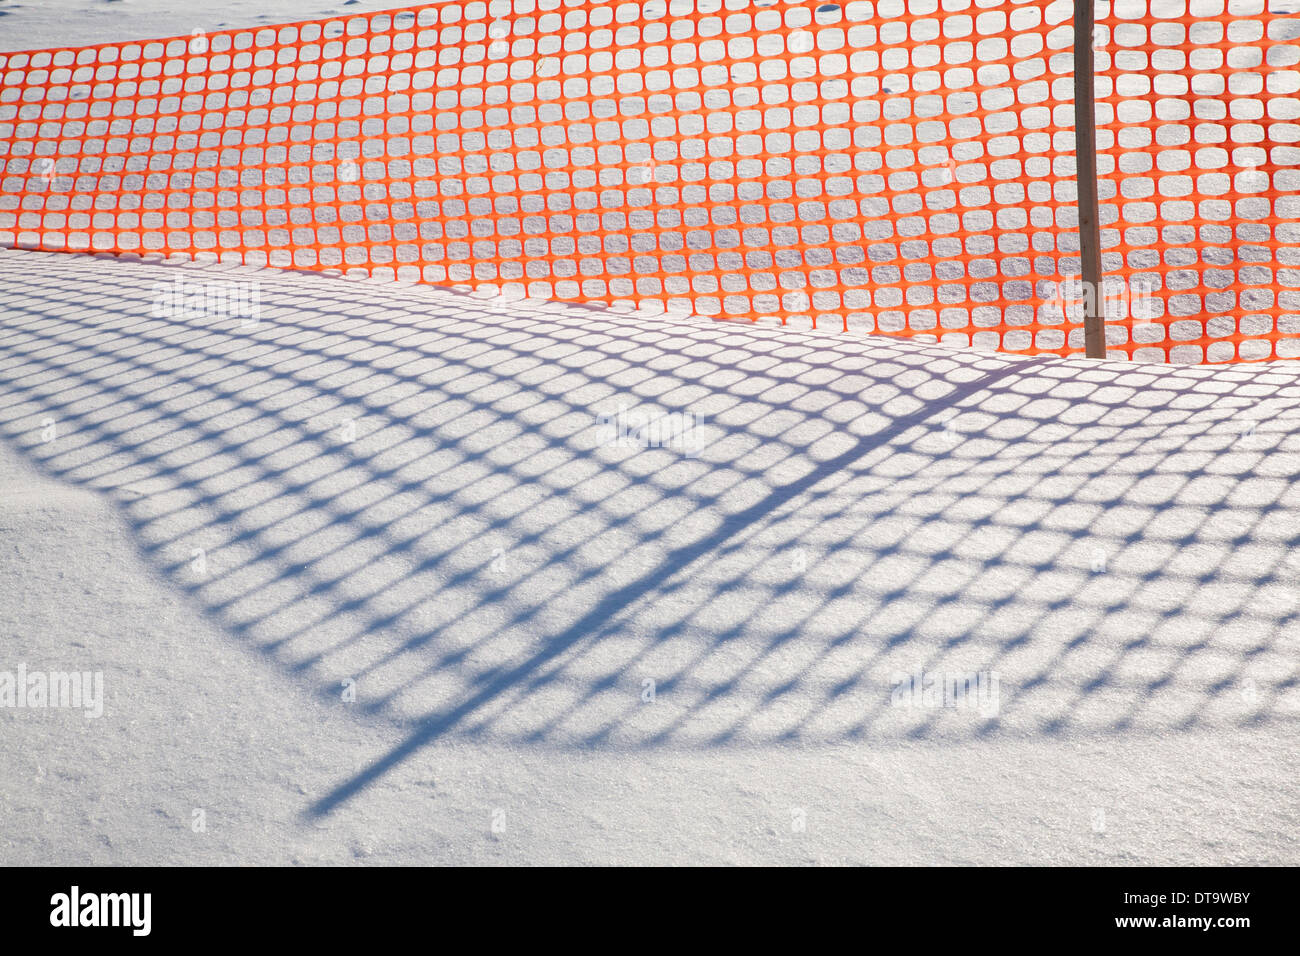 Shadows from an orange plastic snow fence make patterns on the New England snow. Stock Photo